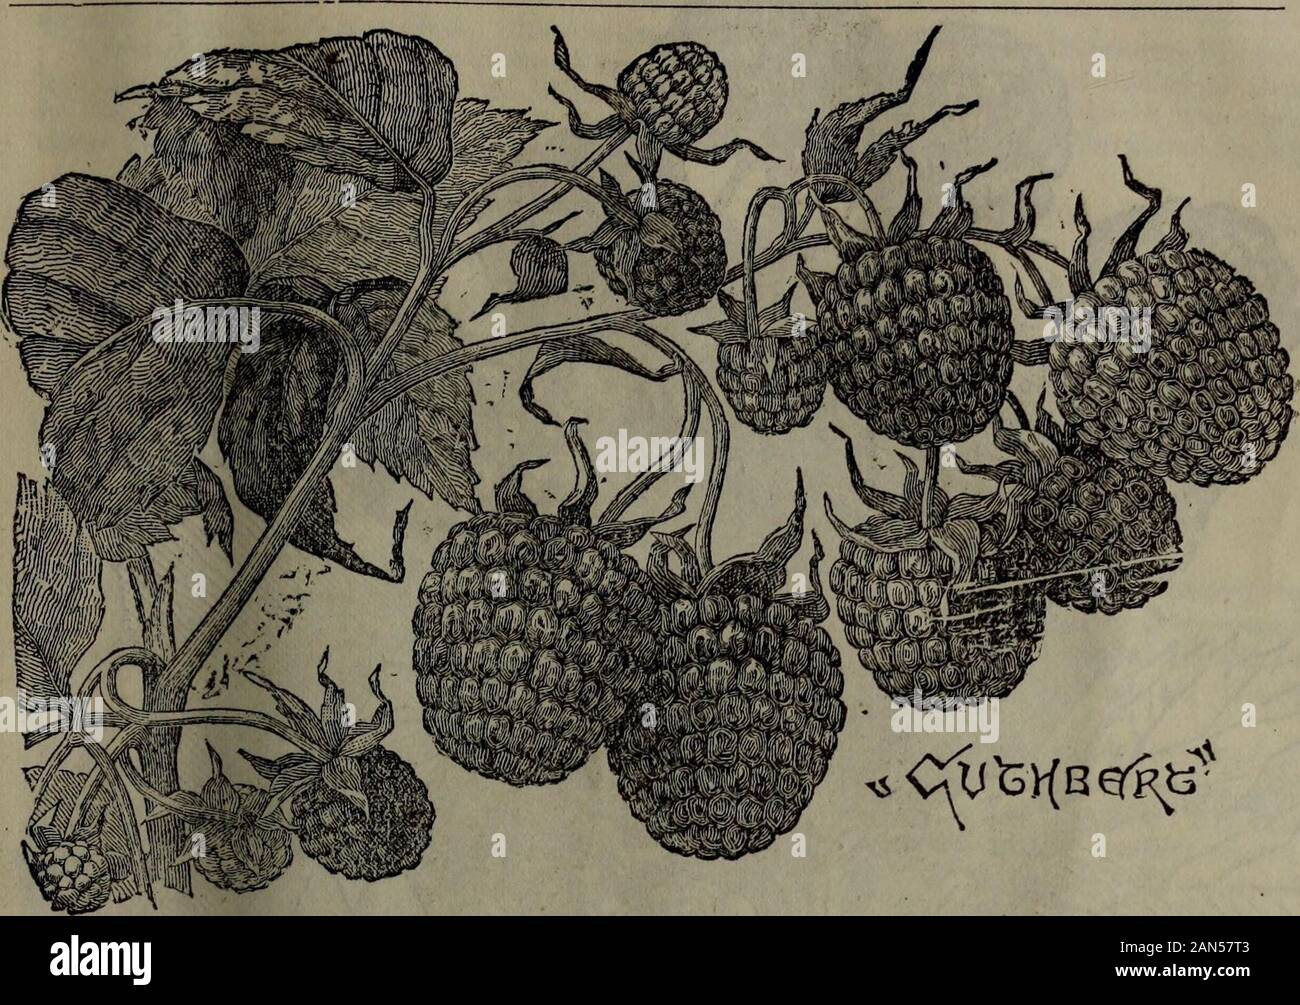 T.CRobinson's Catalogue of small fruits and grape vines, Owen Sound, Ont. . a?the Turner, but earlier and firmer, and are confident we have it in the Crimson Boauty. Price—50 cents each ; $5.00 per dozen. T. C. Robinson, Owen Sound. 17. CUTHBERT. I have well tested this, and regard it as decidedly the most valuable of all testedvarieties for market, as it is firm, large to very large, good color when first ripe, well-flavored, and enormously productive with good treatment ; but it needs to be supple-mented with an early berry, as it is medium to very late in ripening. It deserves tobe in every Stock Photo